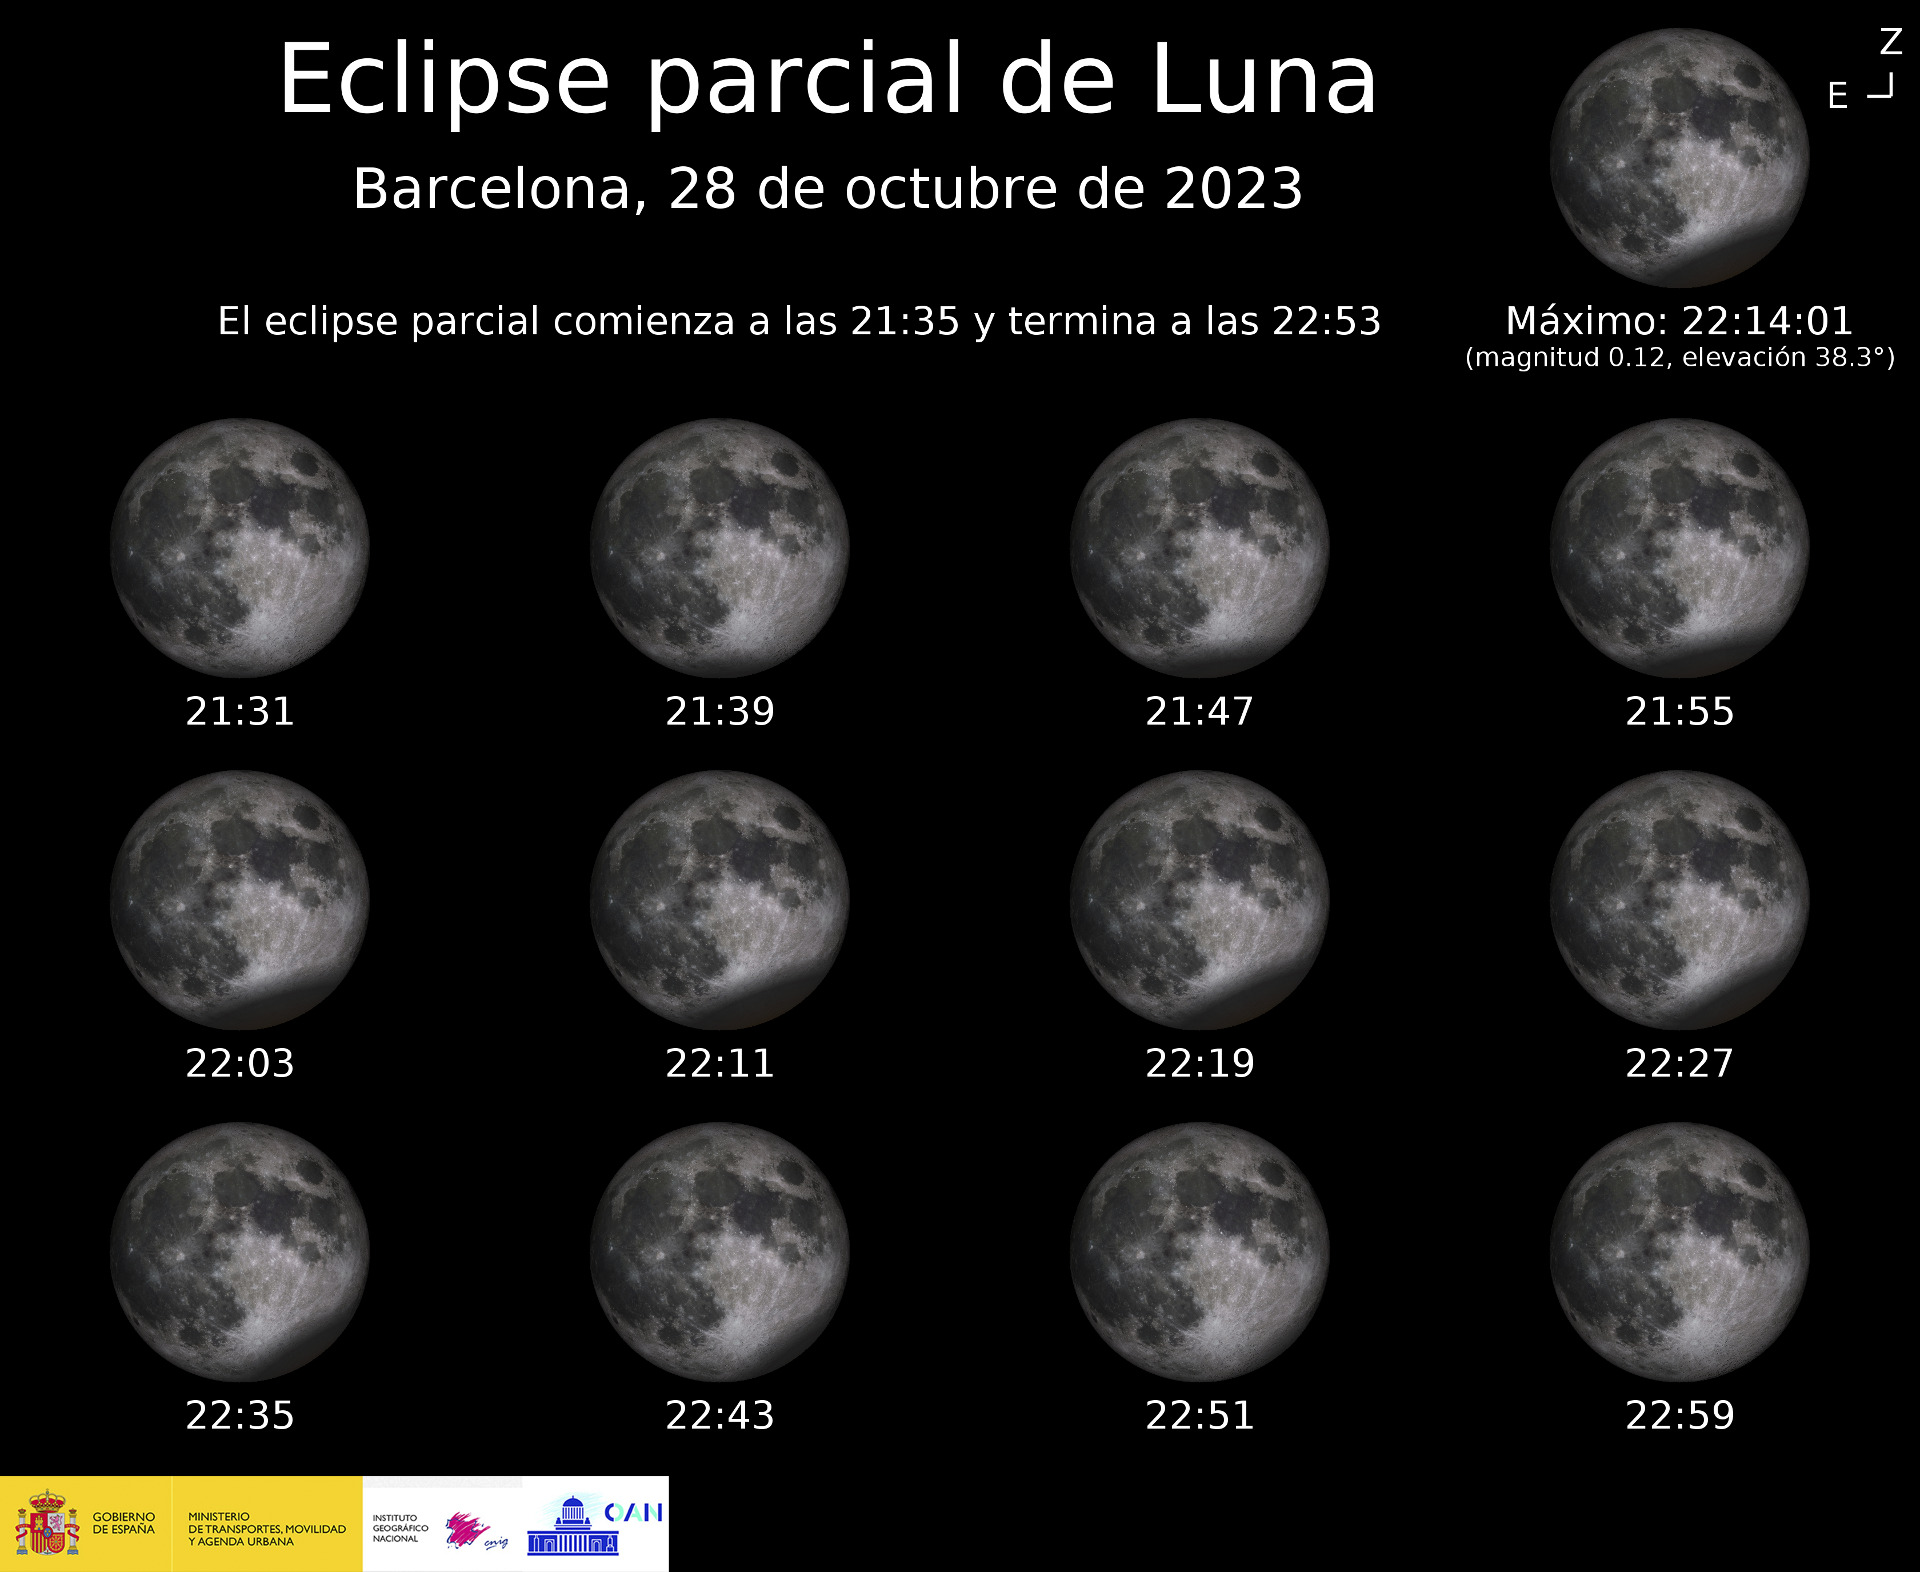 Moon sequence of the partial moon eclipse visible from Barcelona on October 28, 2023